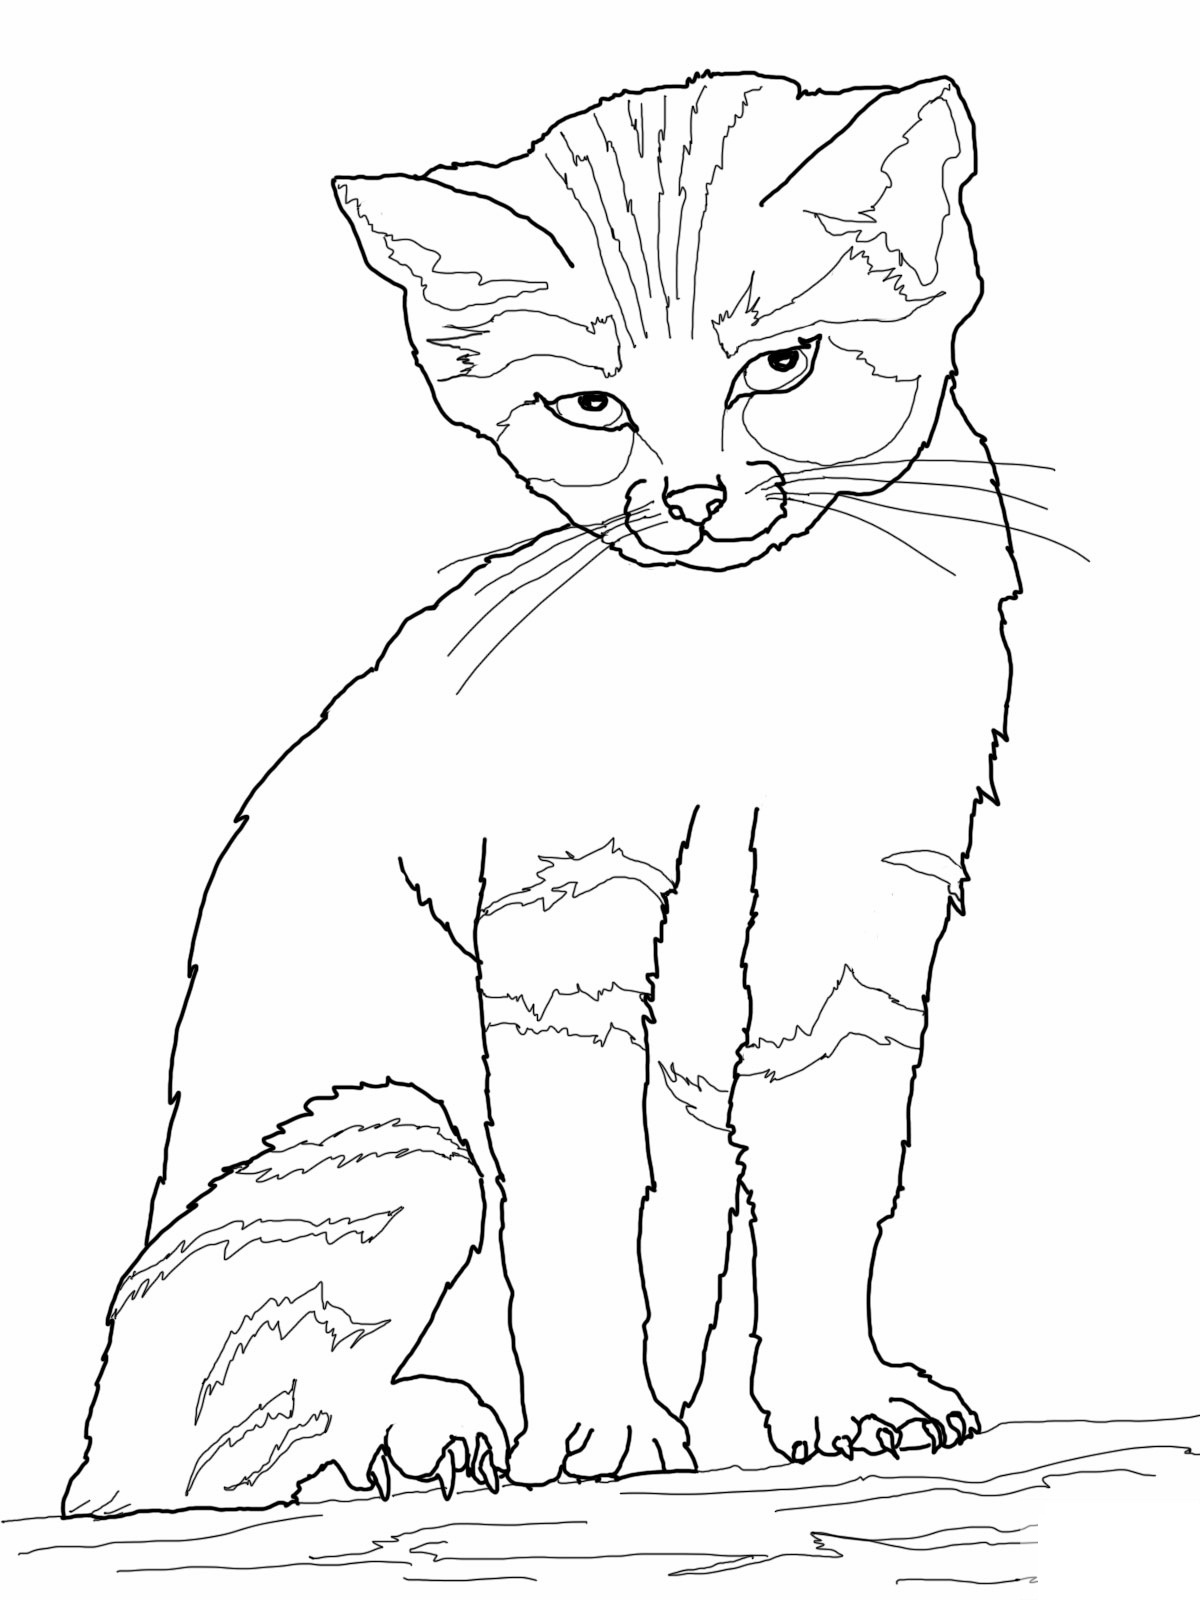 Download Free Printable Cat Coloring Pages For Kids